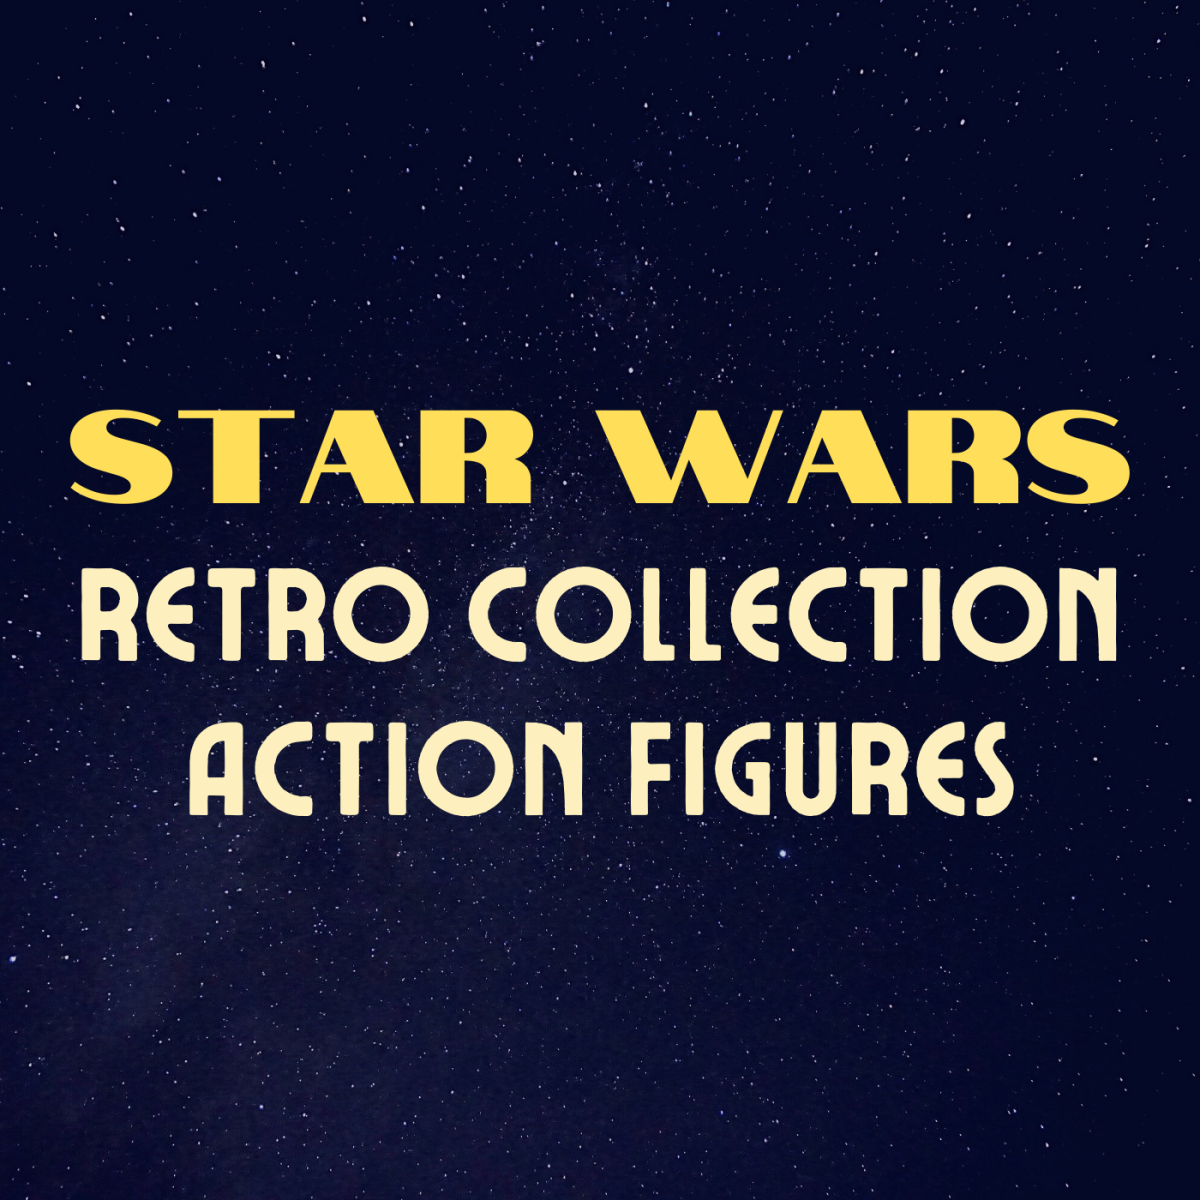 Star Wars Retro Collection Action Figures: Collector's Guide